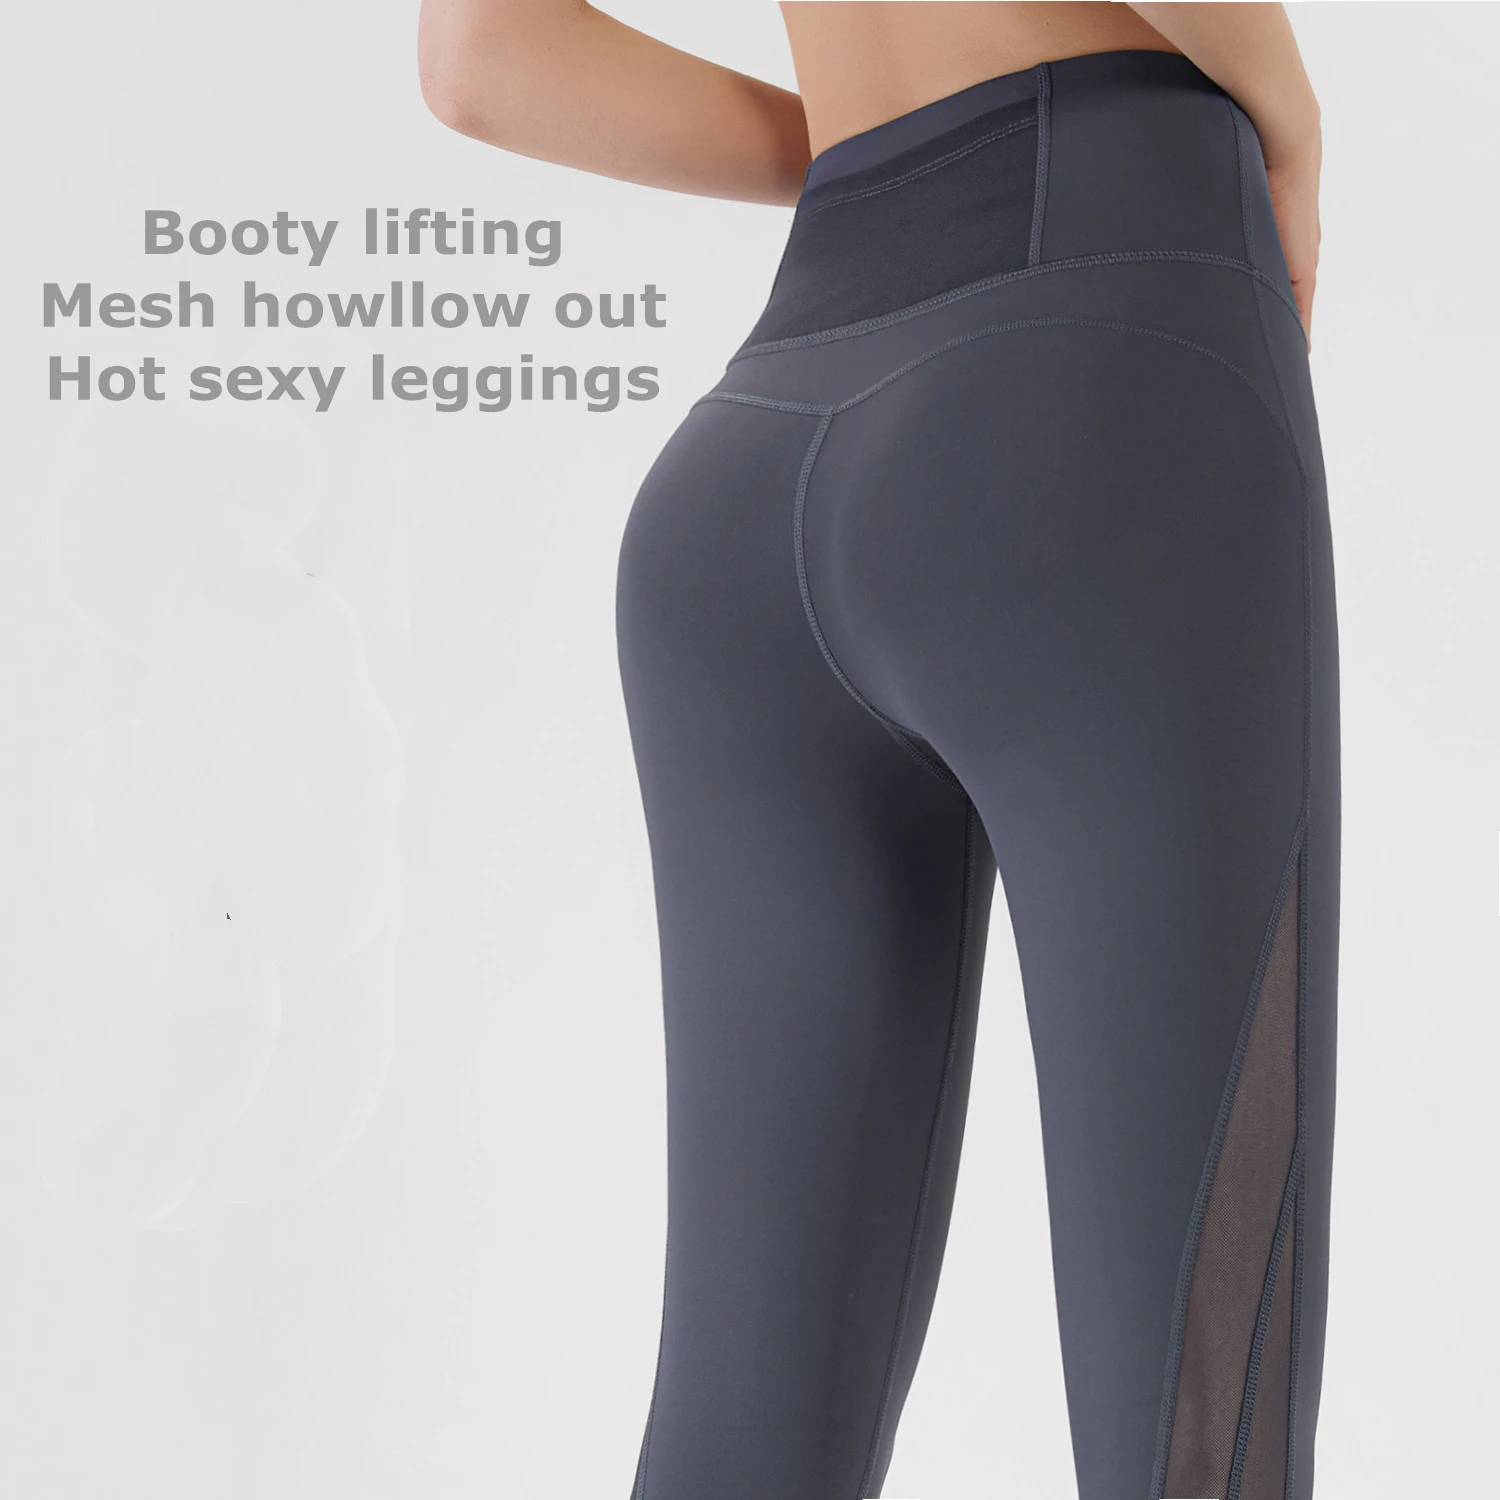 Tight Compression High Waist Seamless Leggings Dynamic Hollow Out Mesh Back Pocket Yoga Pants for Women Bum Lifting Sexy Legging